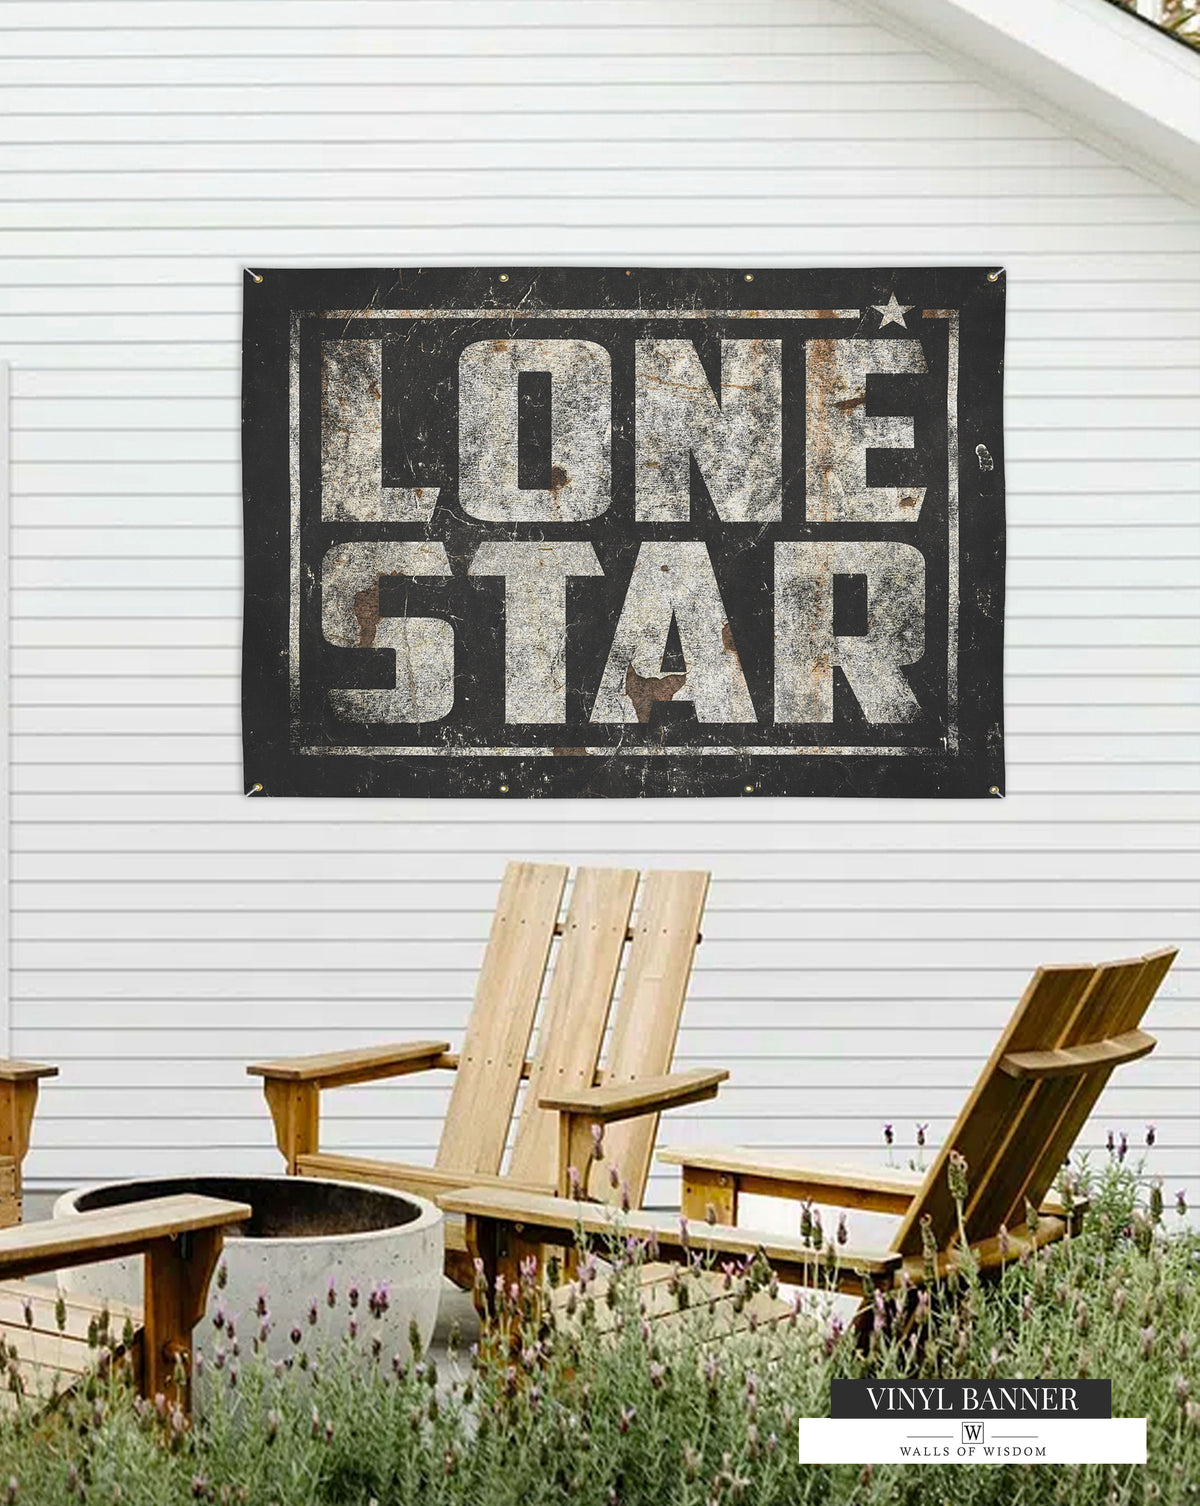 Vintage Lone Star Western Vinyl Sign: Ideal for Texas Style Decor